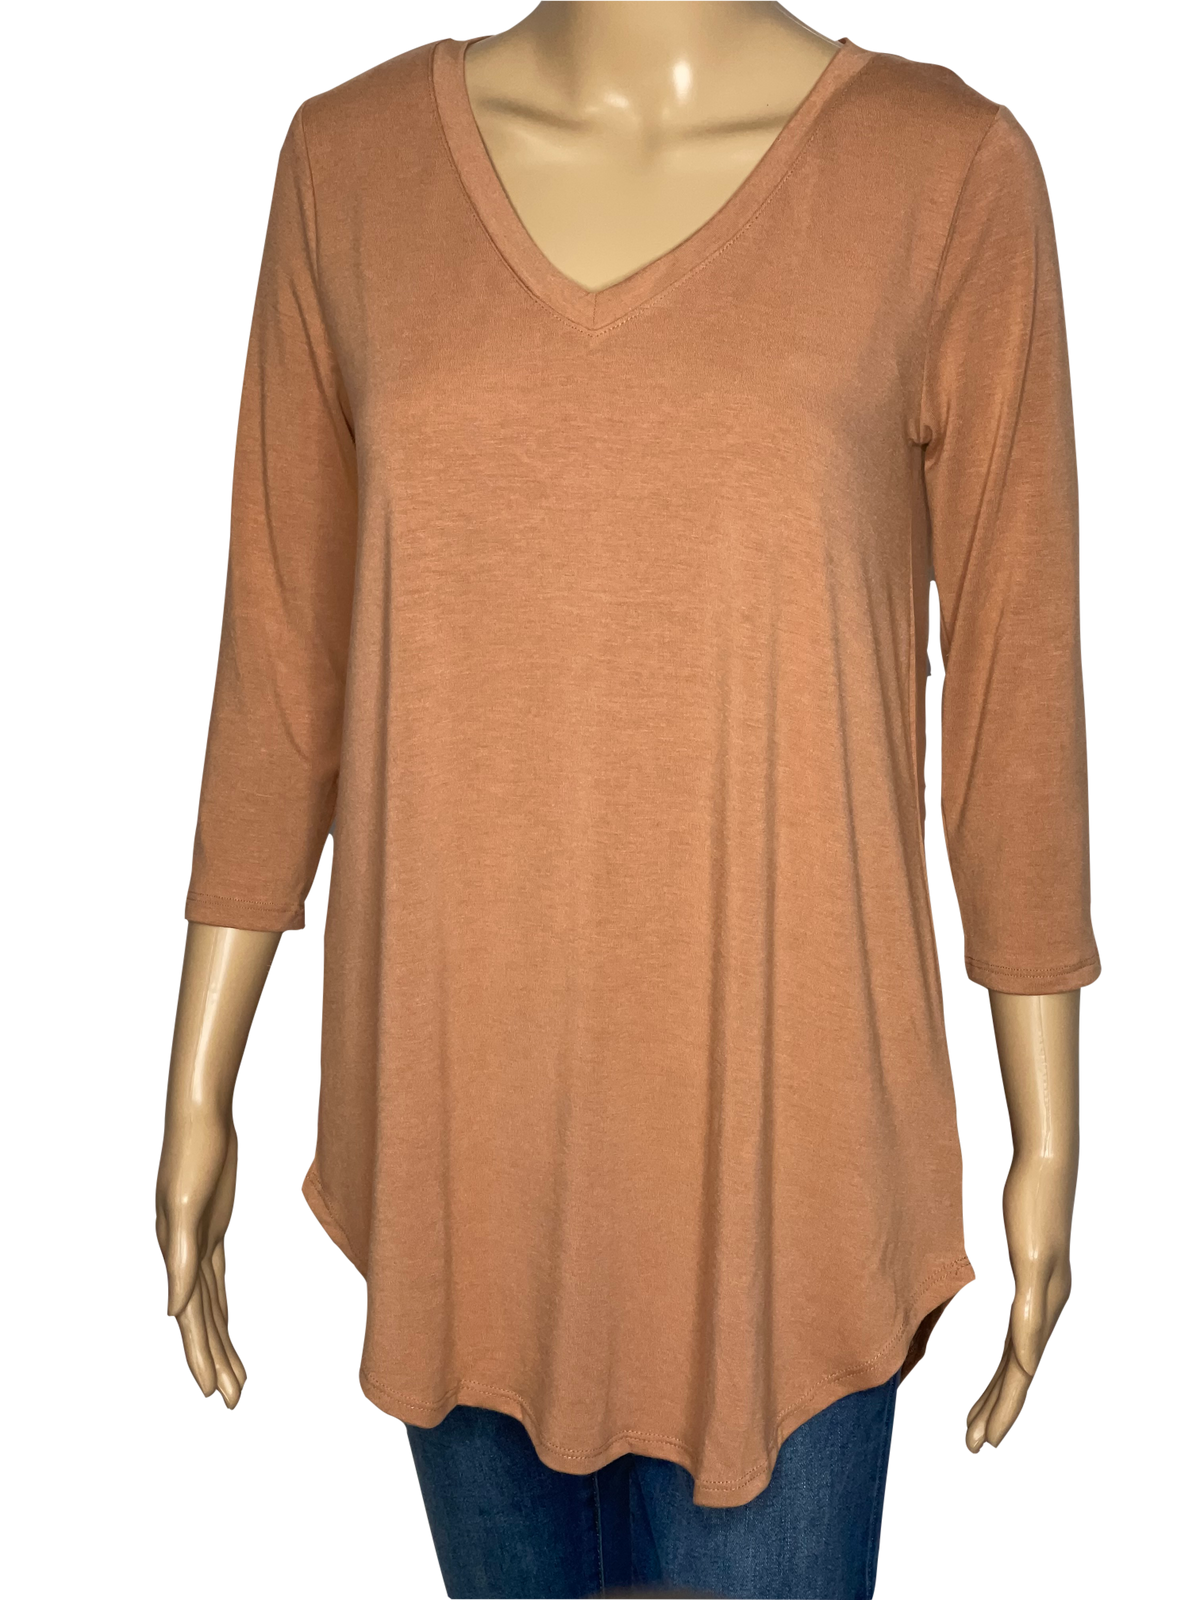 Solid Color Tunic Top with Round Hem